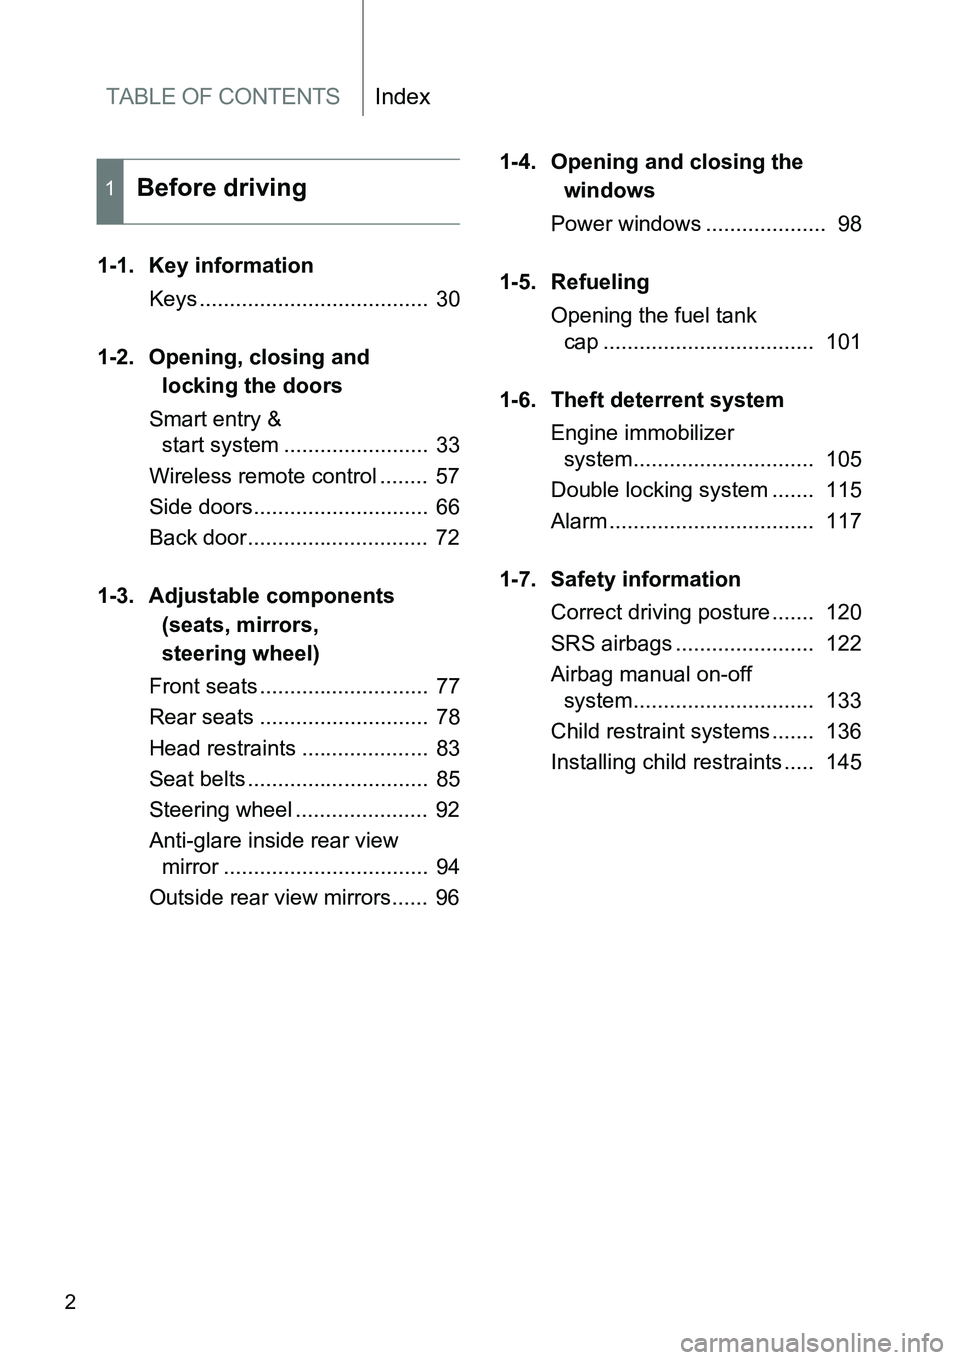 TOYOTA VERSO S 2015  Owners Manual TABLE OF CONTENTSIndex
2
1-1. Key information
Keys ......................................  30
1-2. Opening, closing and 
locking the doors
Smart entry & 
start system ........................  33
Wire